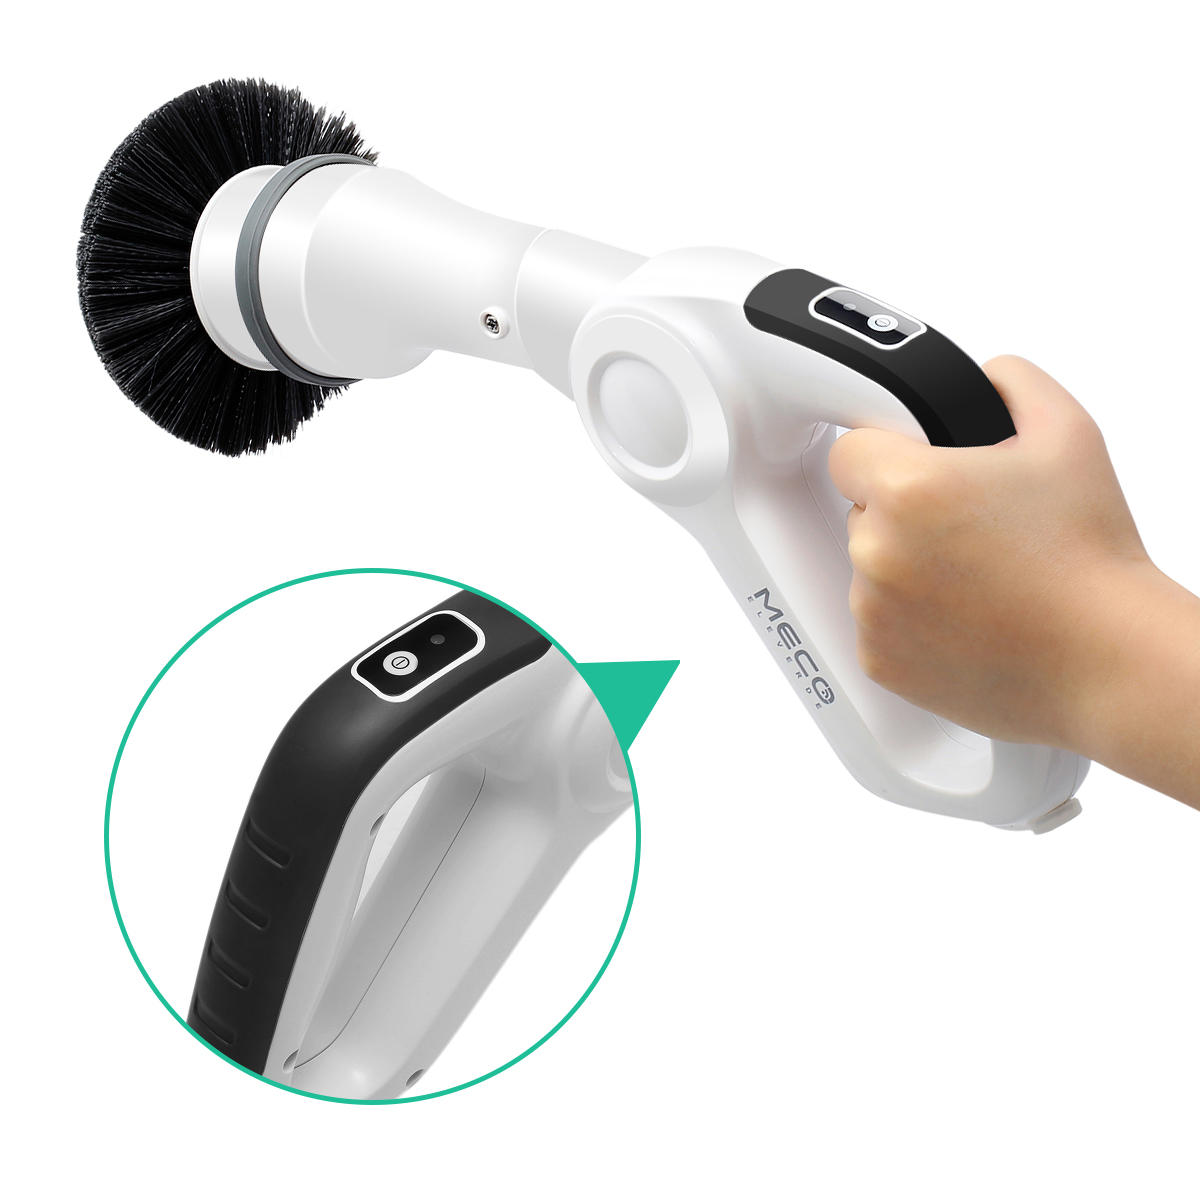 MECO Electric Spin Scrubber Cleaner Power Cordless Tub and Tile Scrubber Handheld Cleaning Supplies with 3 Replaceable B